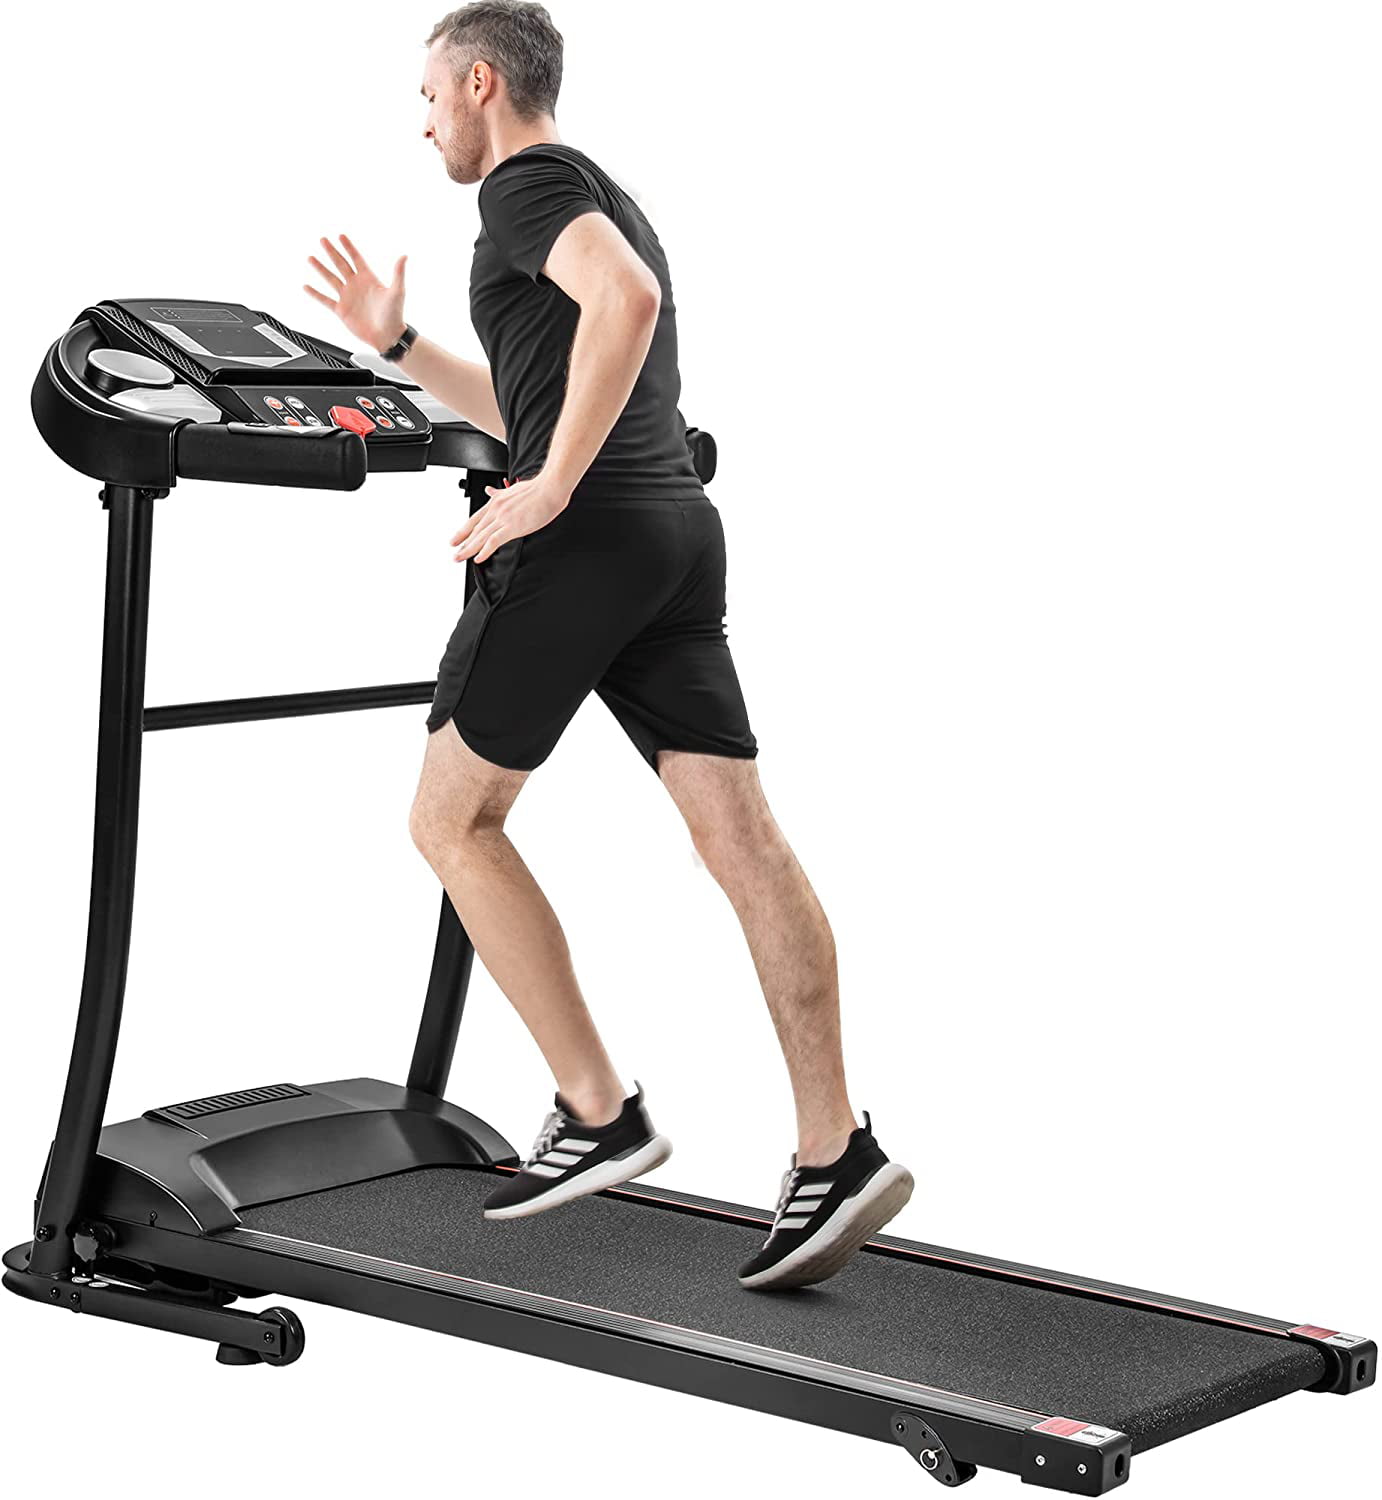 Supine Details about    Four-in-one Mechanical Treadmil Folding Shock Running Twisting Massag 